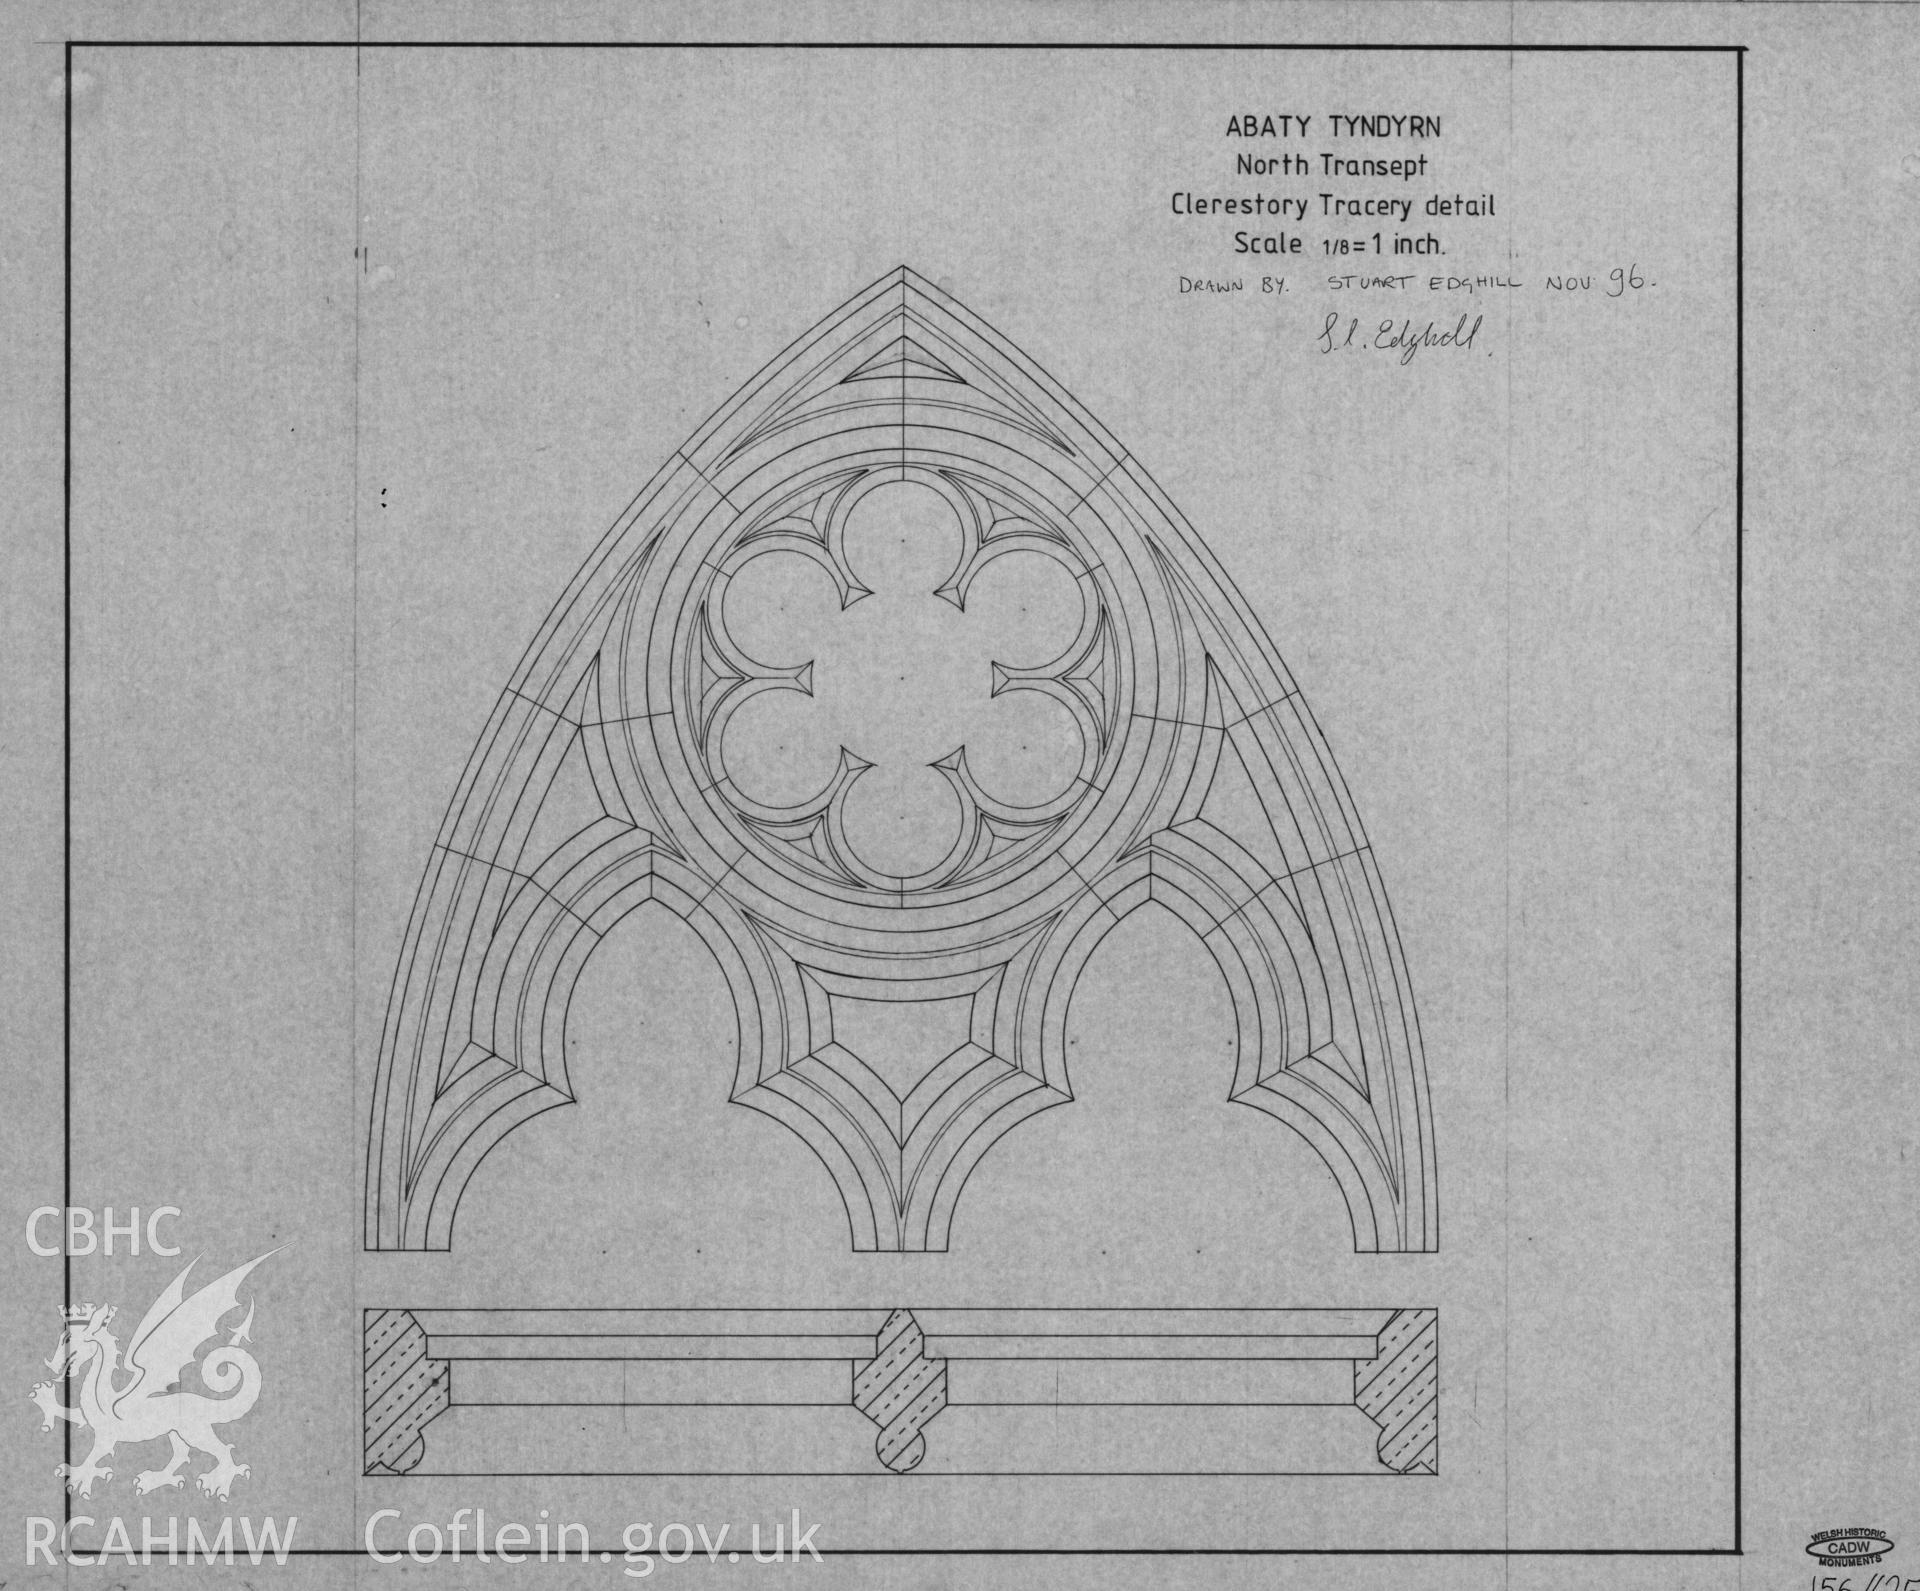 Digital copy of a Cadw guardianship monument drawing of Tintern Abbey, north transept, clerestory tracery detail, dated November 1996.